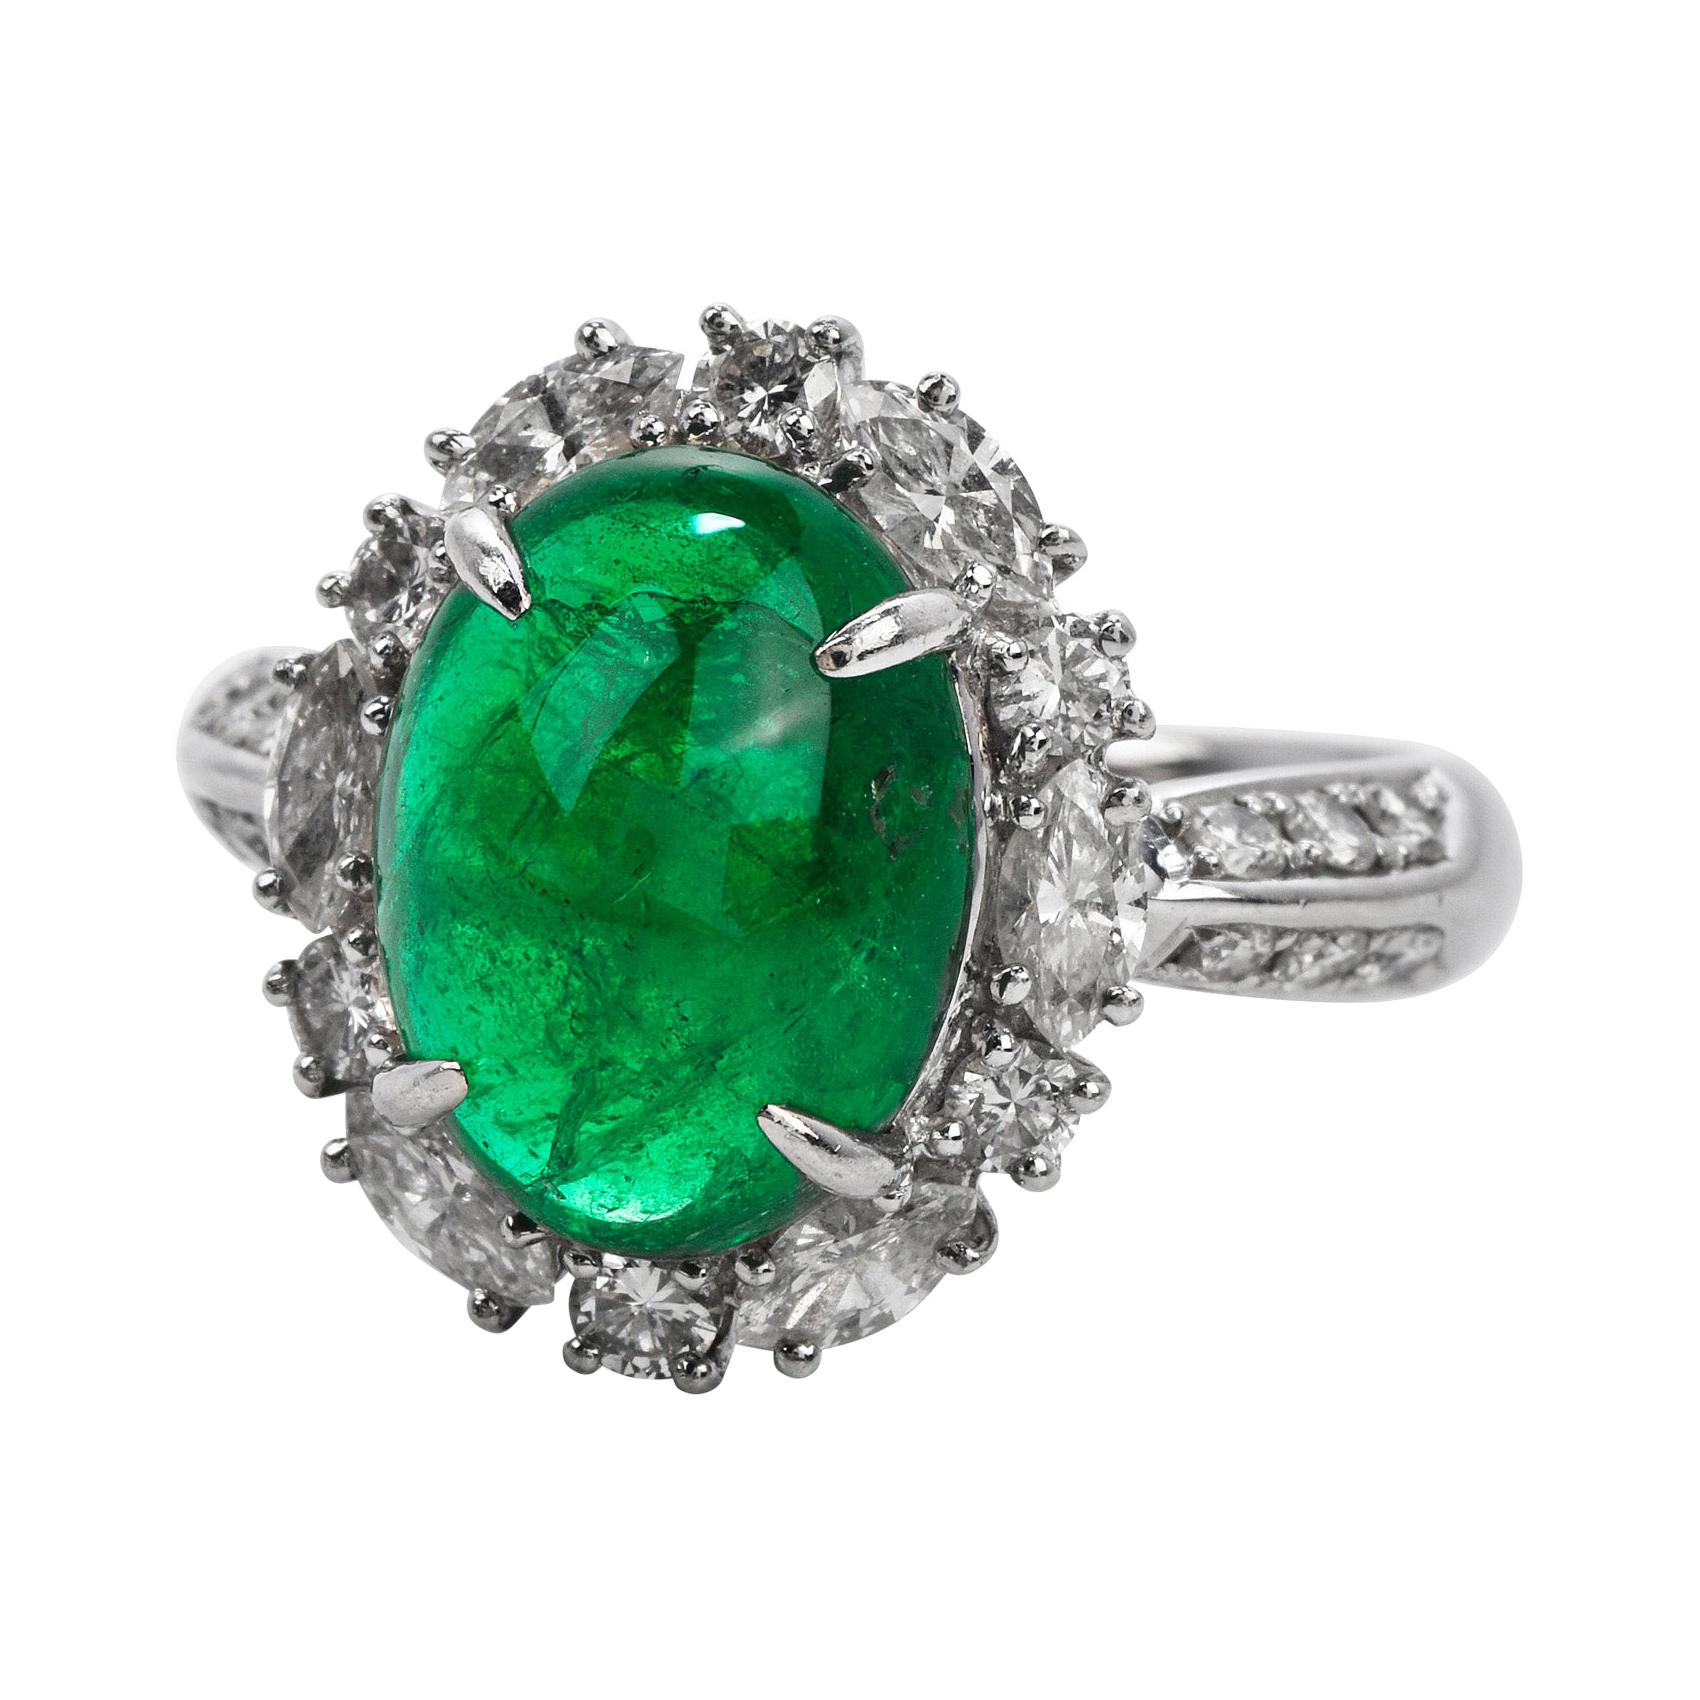 This exquisite GIA Genuine Emerald & Diamond Cocktail Ring is expertly crafted in solid platinum with a total weight of 9.54 grams.

The emerald with a weight of approx. 5.17 carats are surrounded by (6) round cut and (6) marquise cut genuine